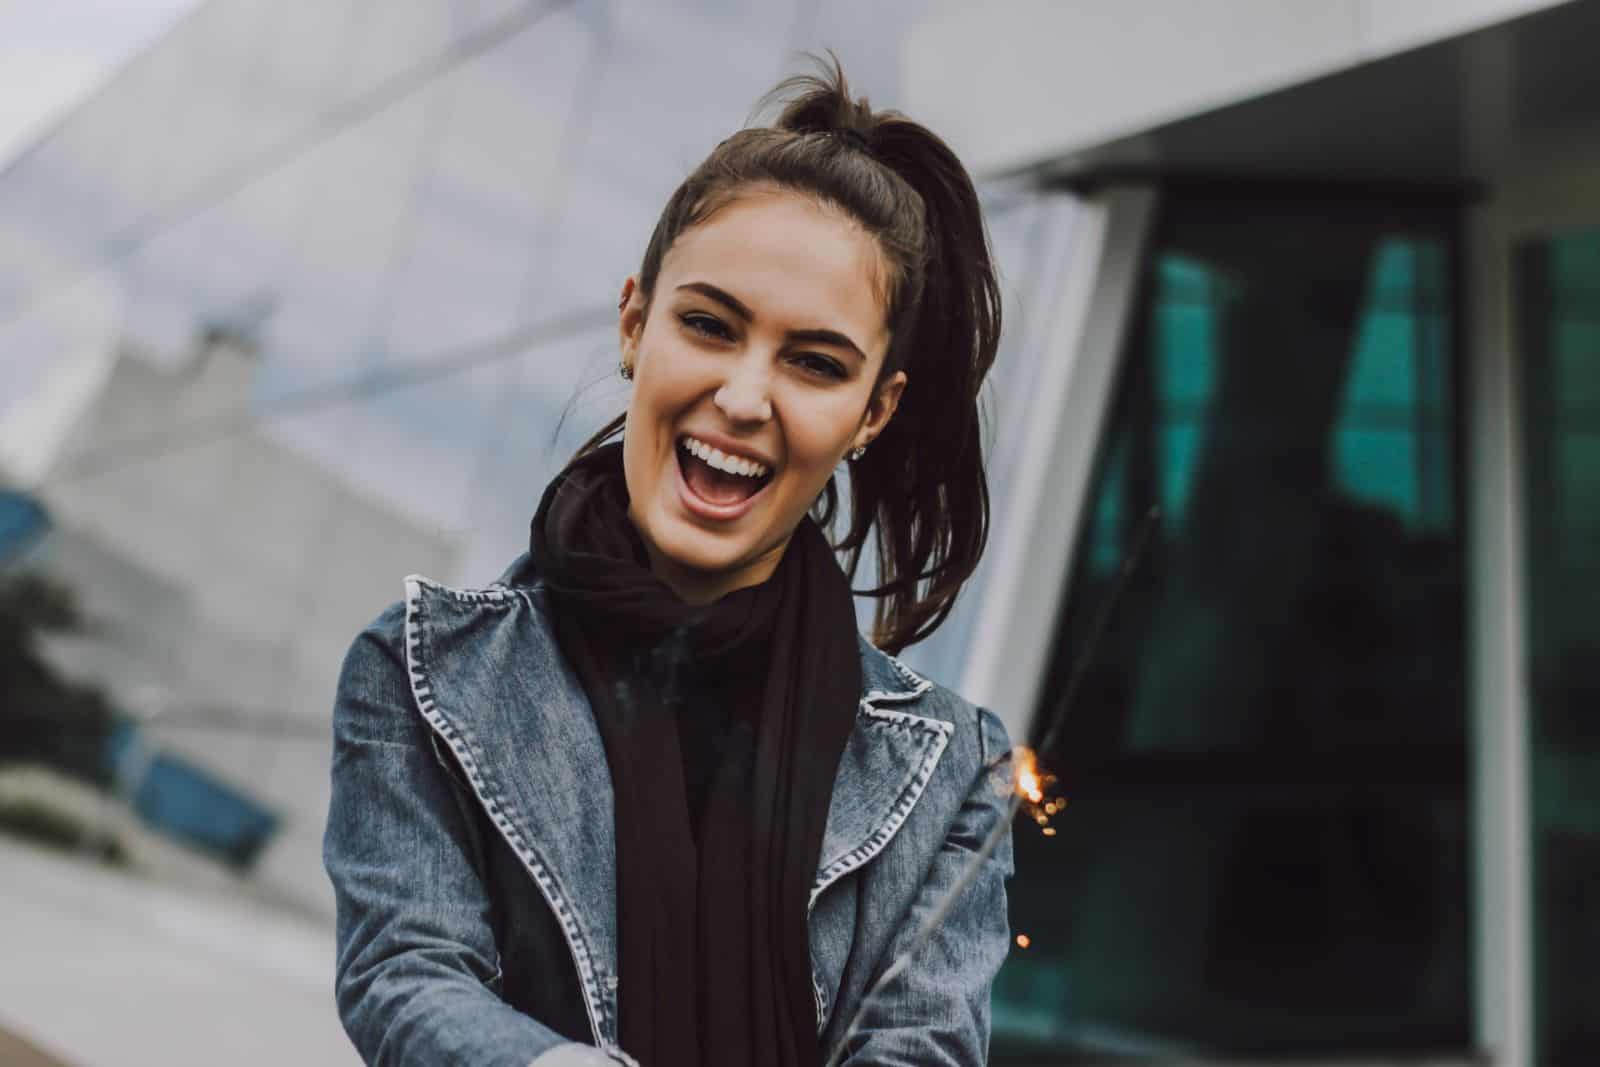 brunette woman laughing